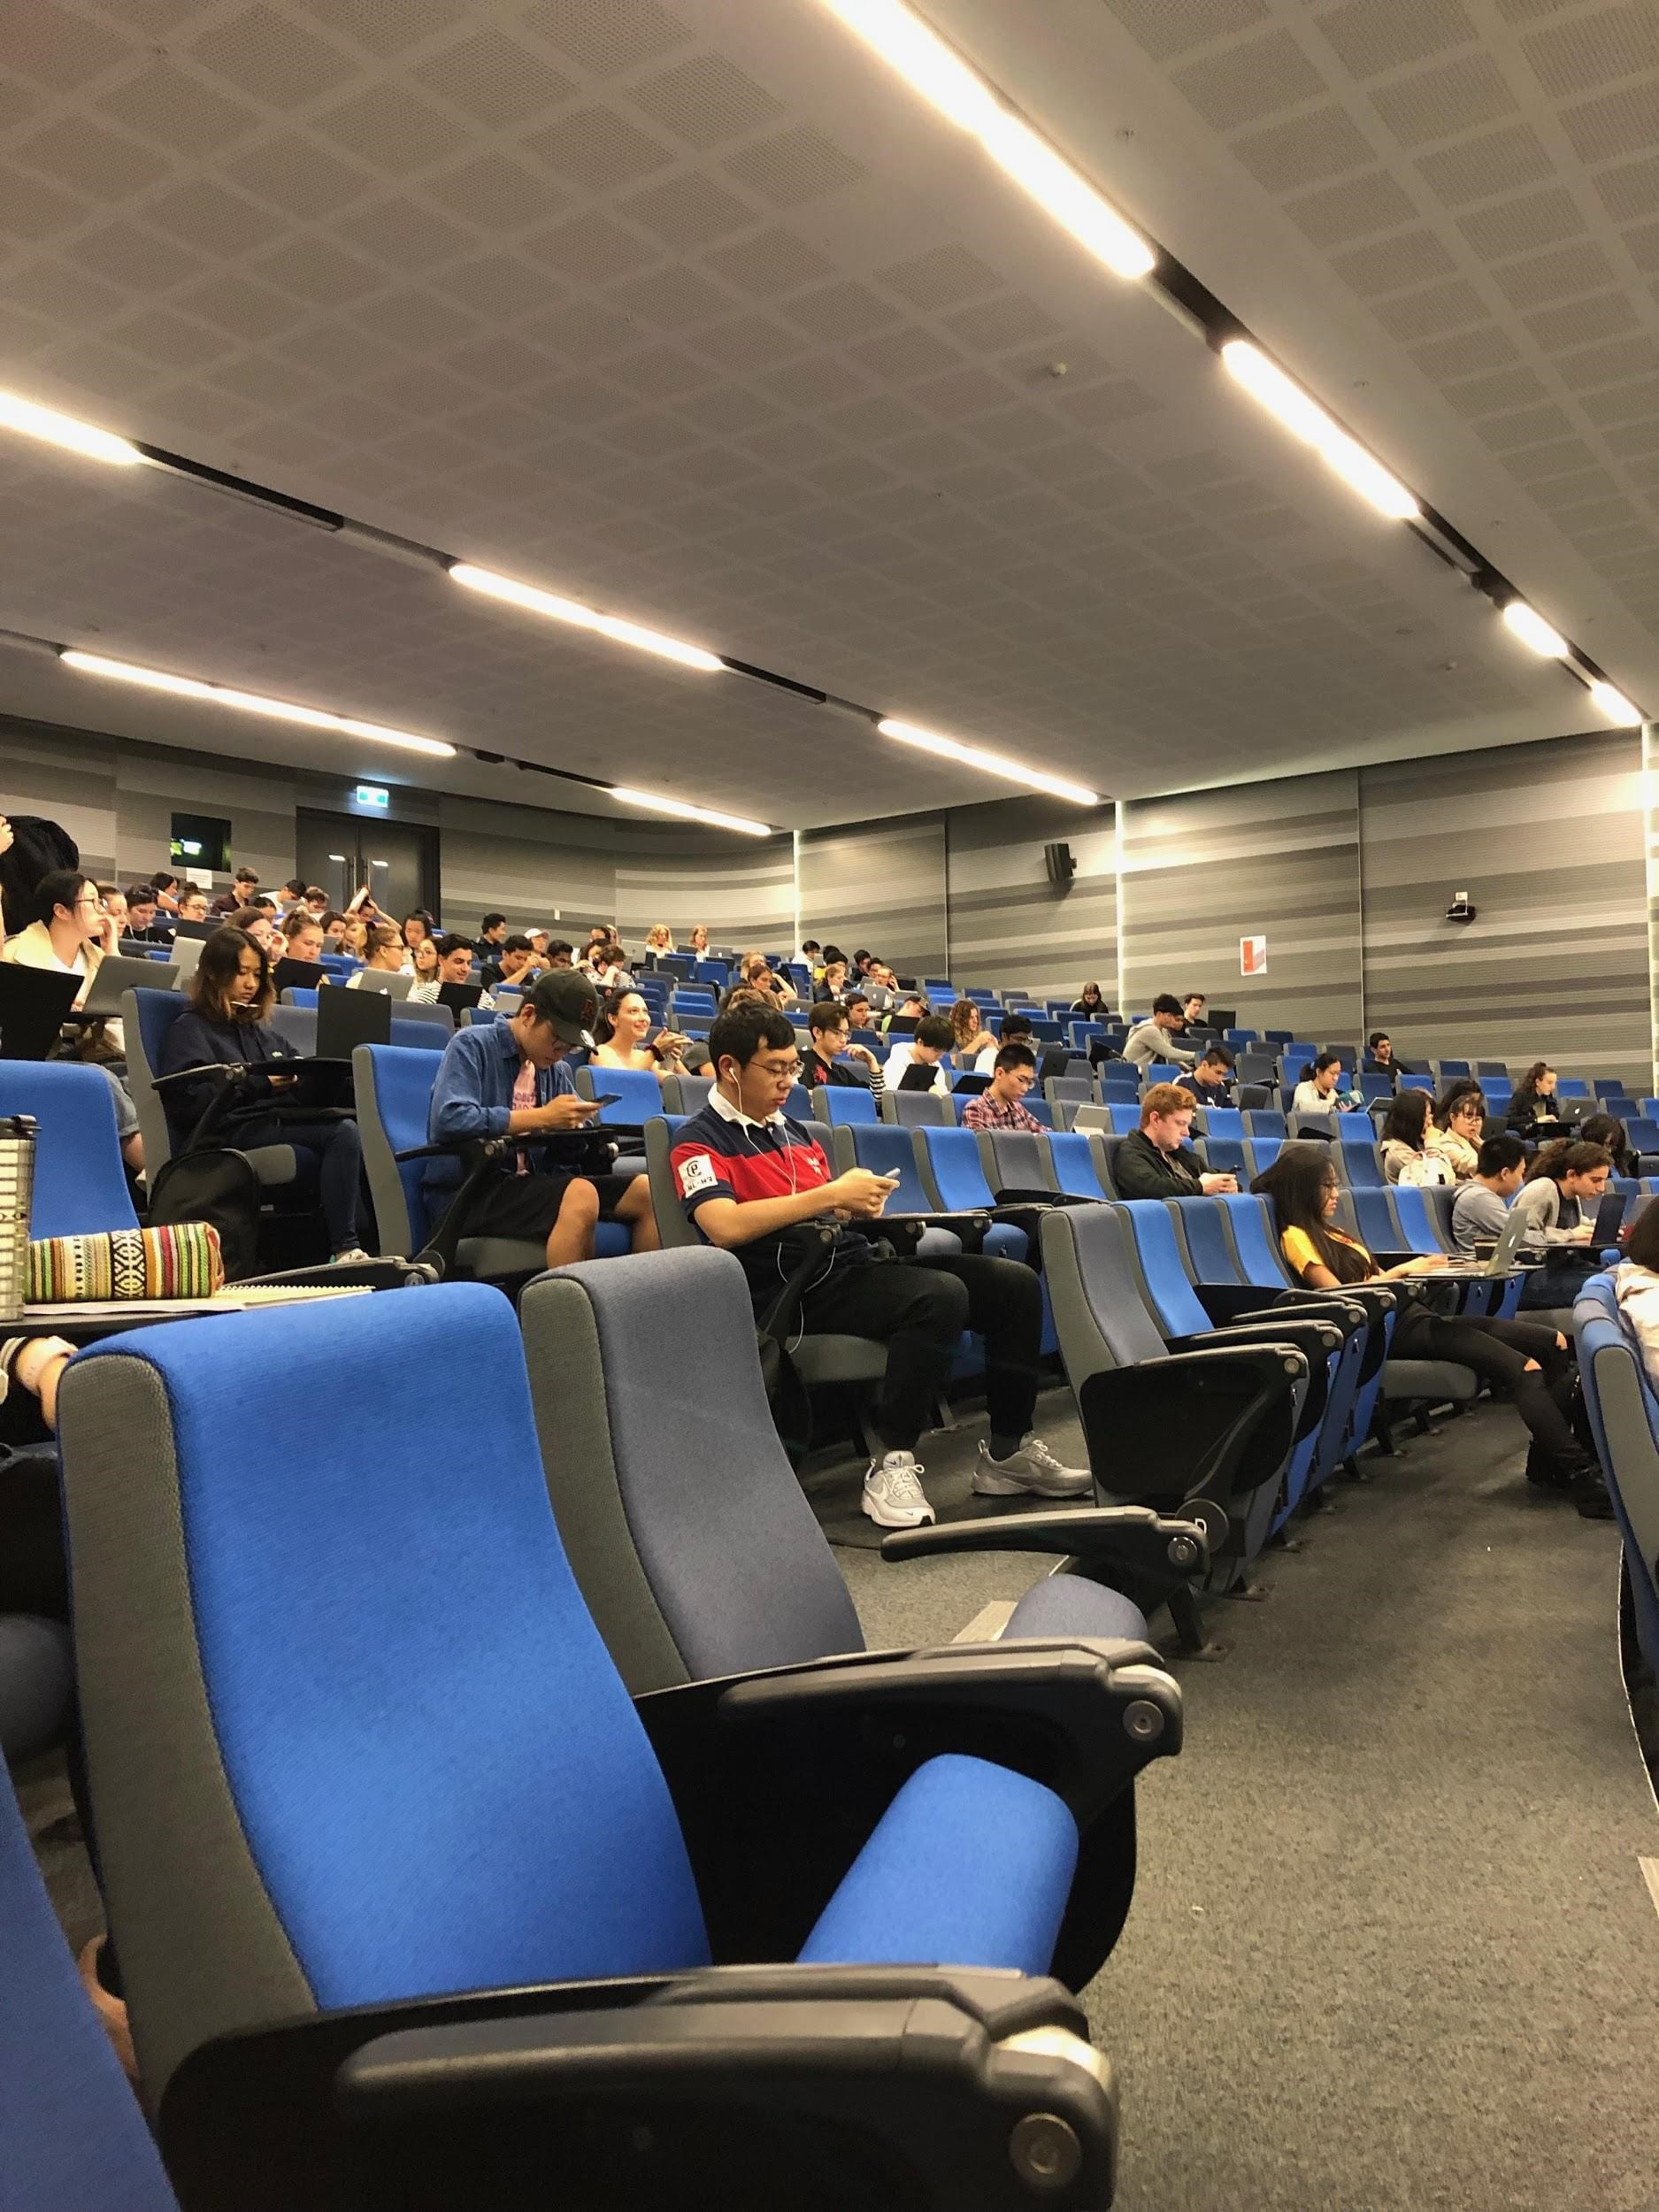 large lecture hall with blue seats and half full of students